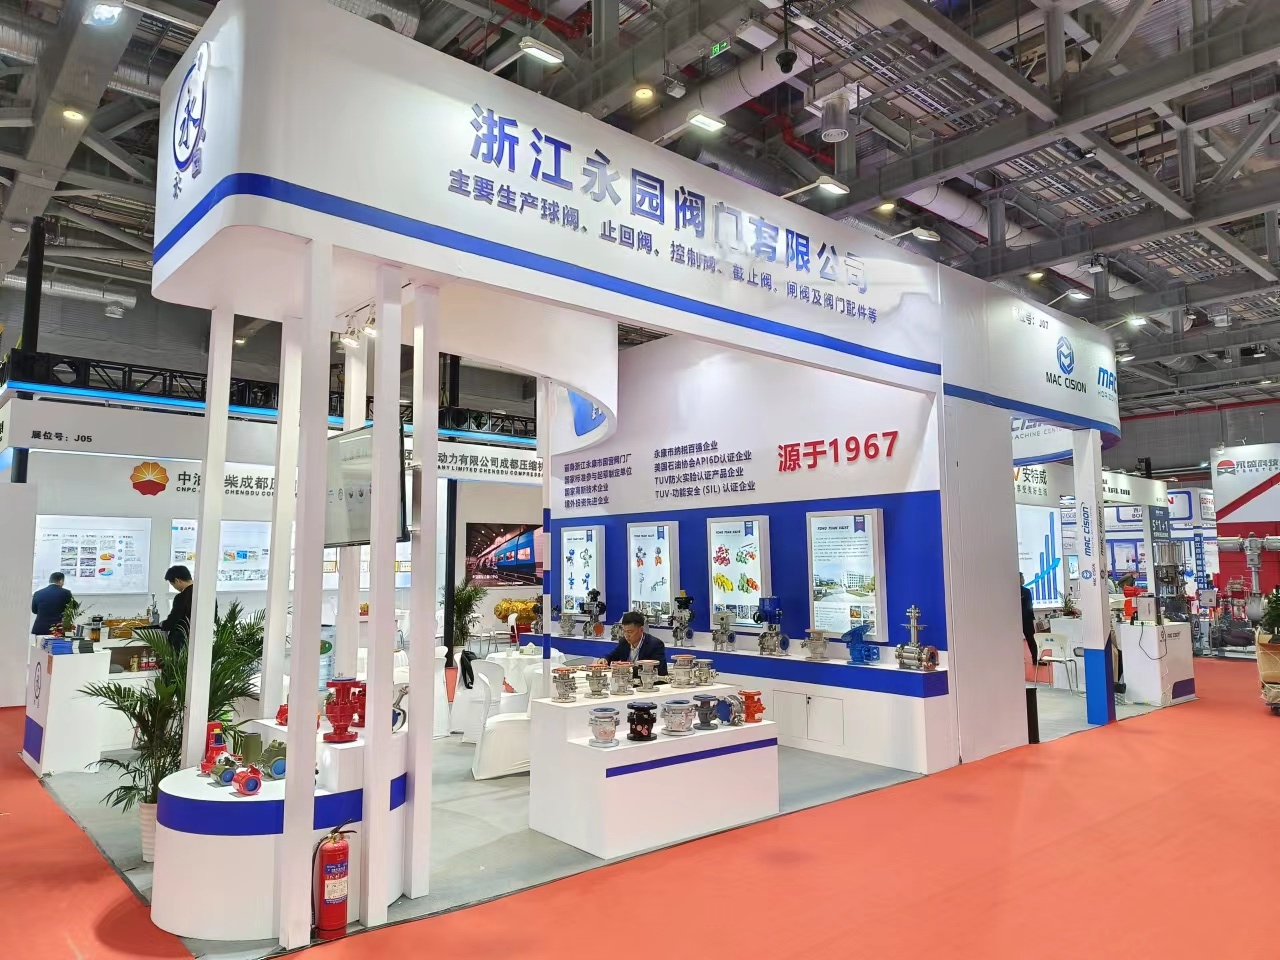 Participated in the 11th China International Fluid Machinery Exhibition at NECC (Shanghai)(图1)